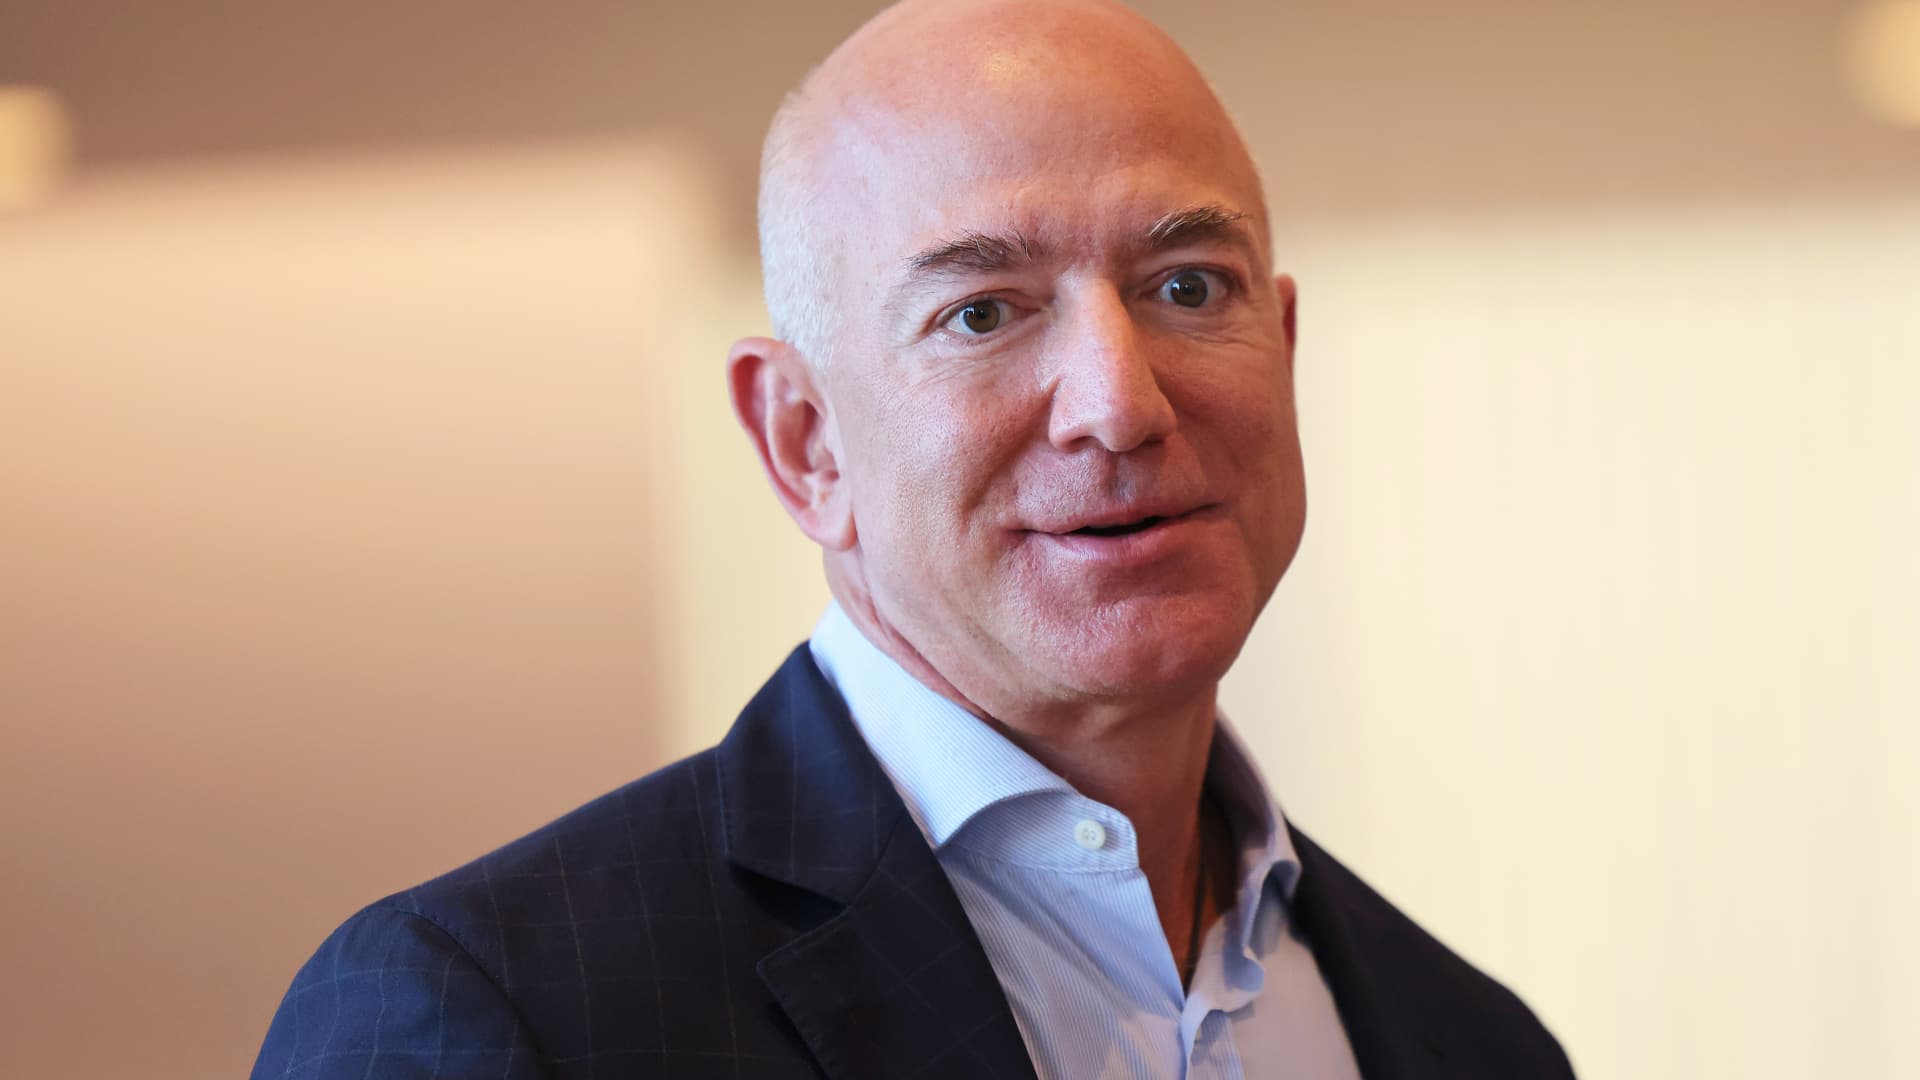 Bezos slams Biden’s call for gasoline stations to cut prices